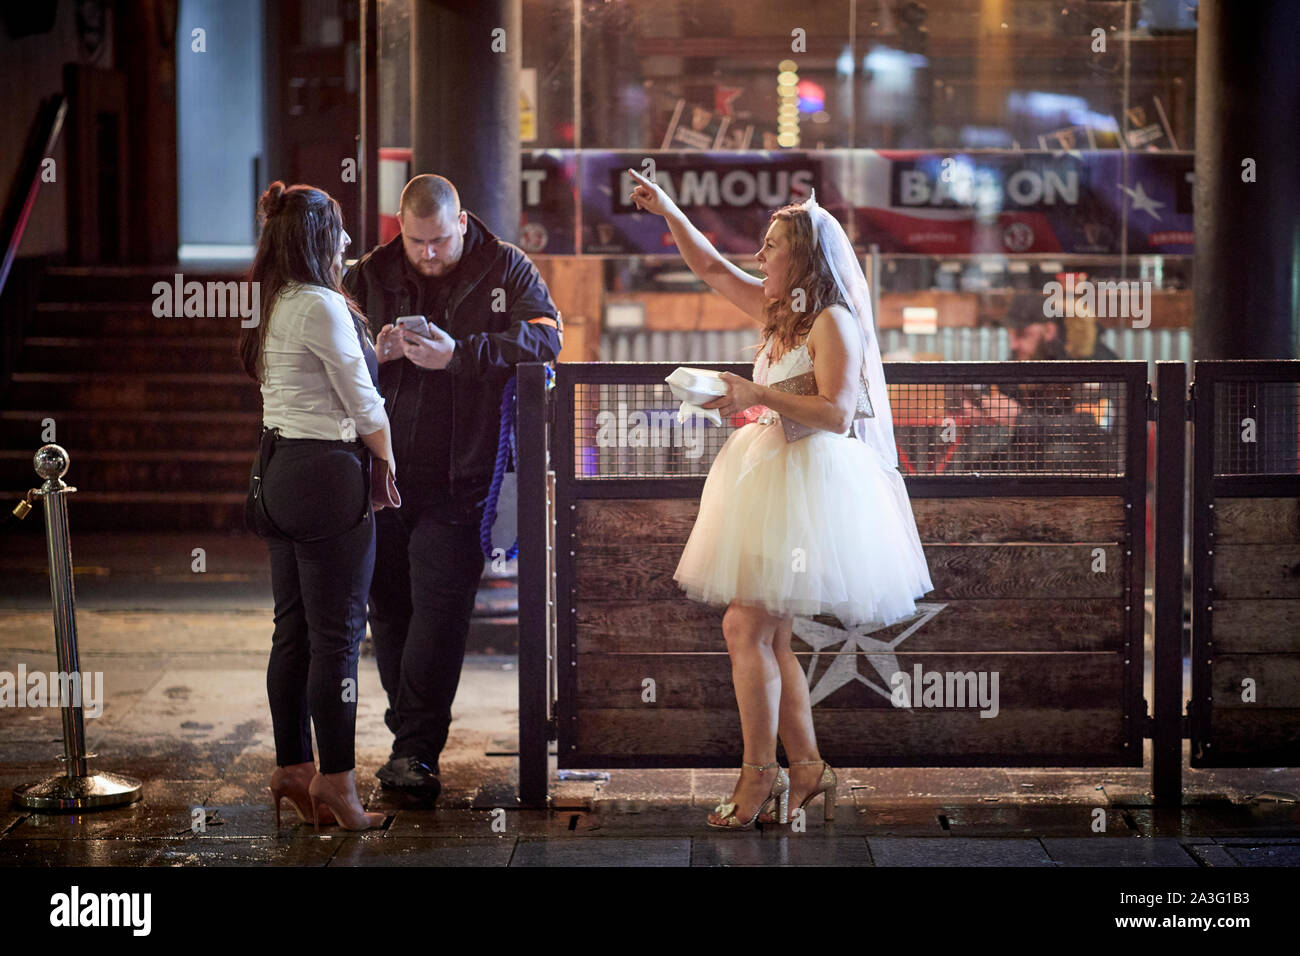 Cardiff Wales, dressed as a bride, hen party chatting to doorman Stock Photo